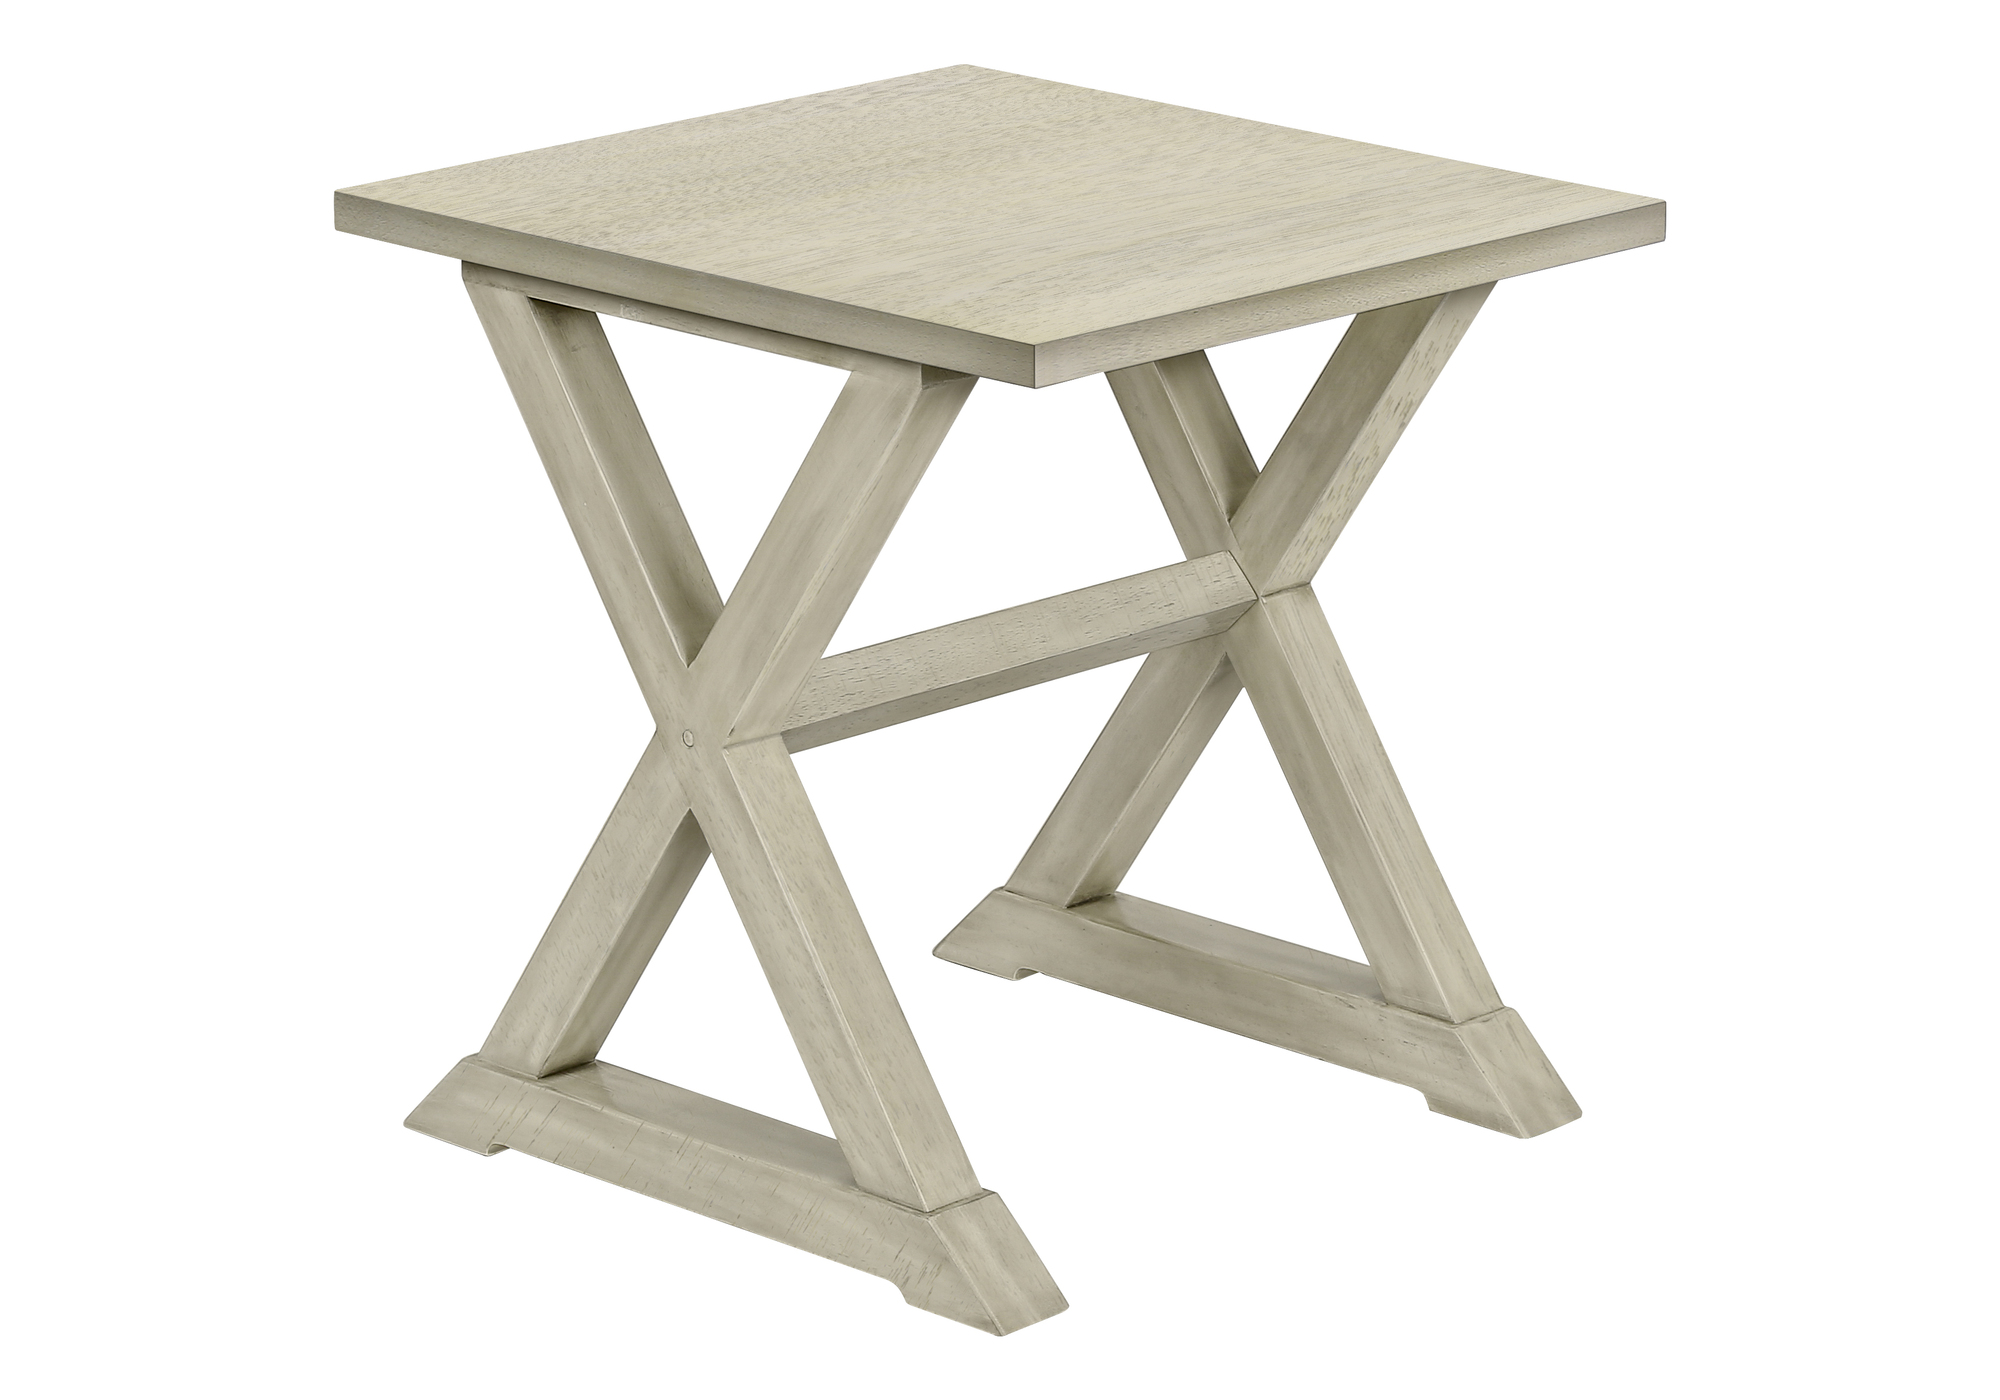 ACCENT TABLE - 24"H / ANTIQUE WHITE VENEER END TABLE